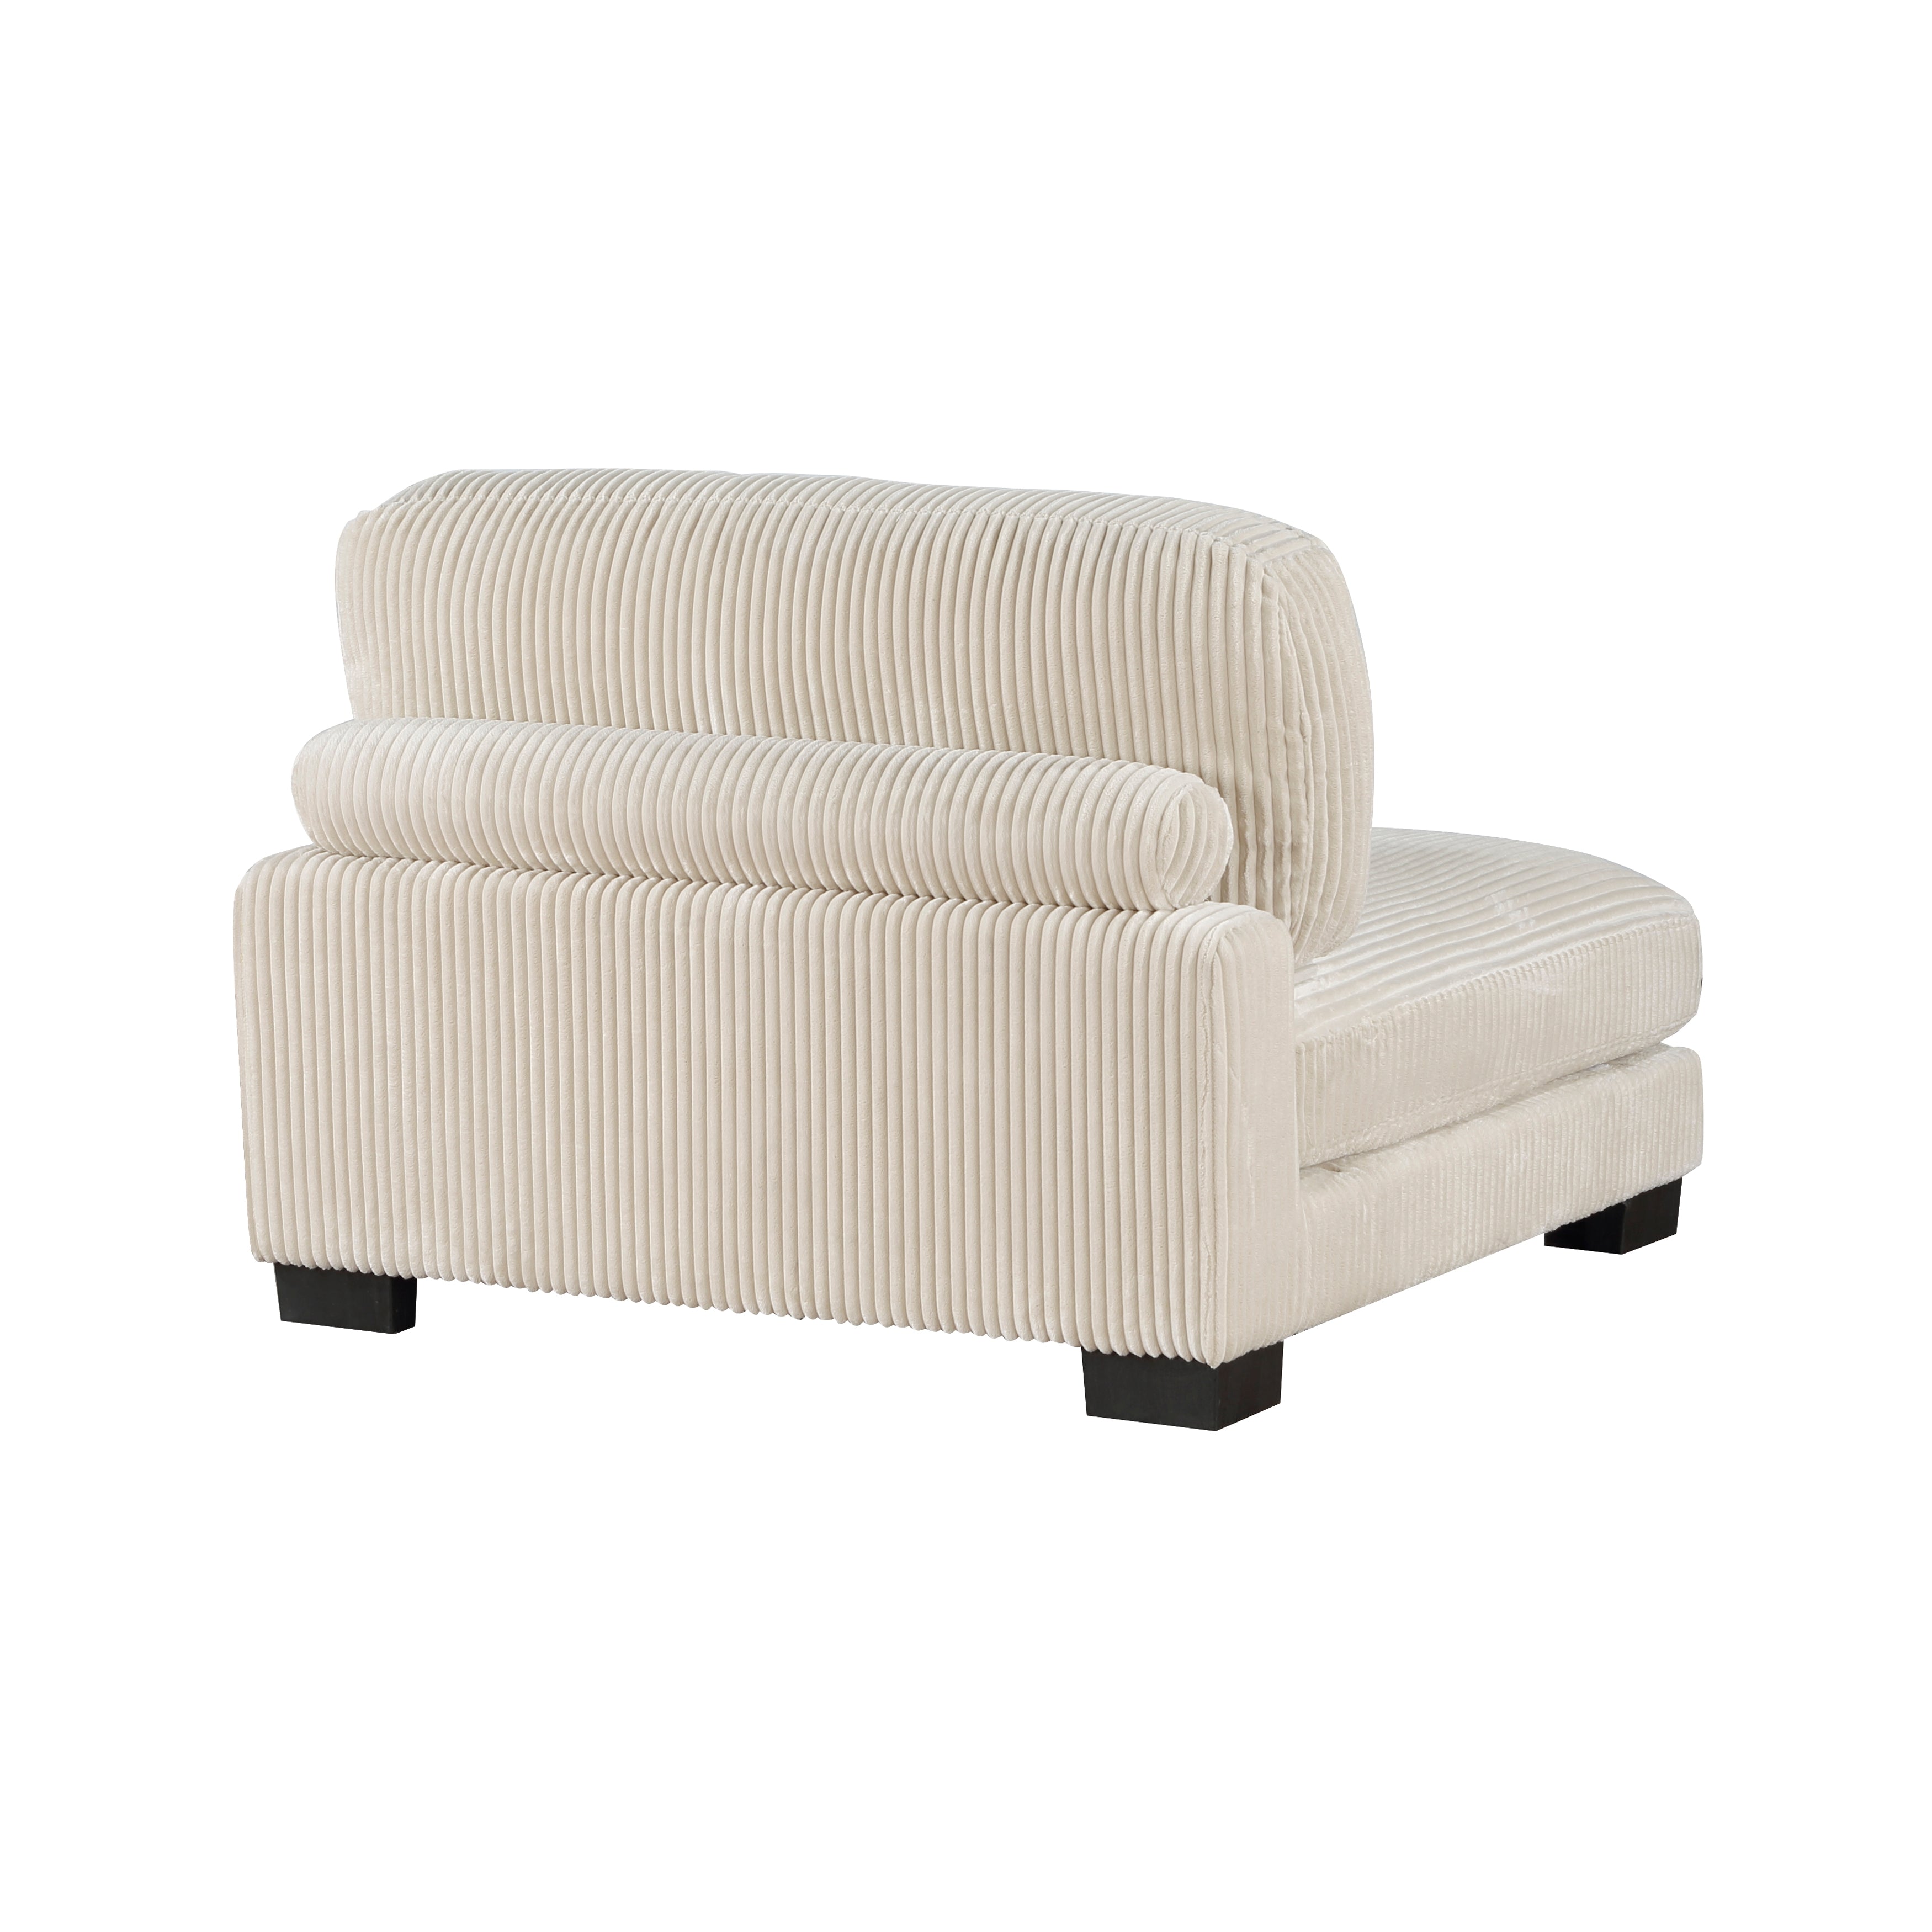 8555BE*4OT (4)4-Piece Modular Sectional with Ottoman - 8555BE*4OT - Bien Home Furniture &amp; Electronics